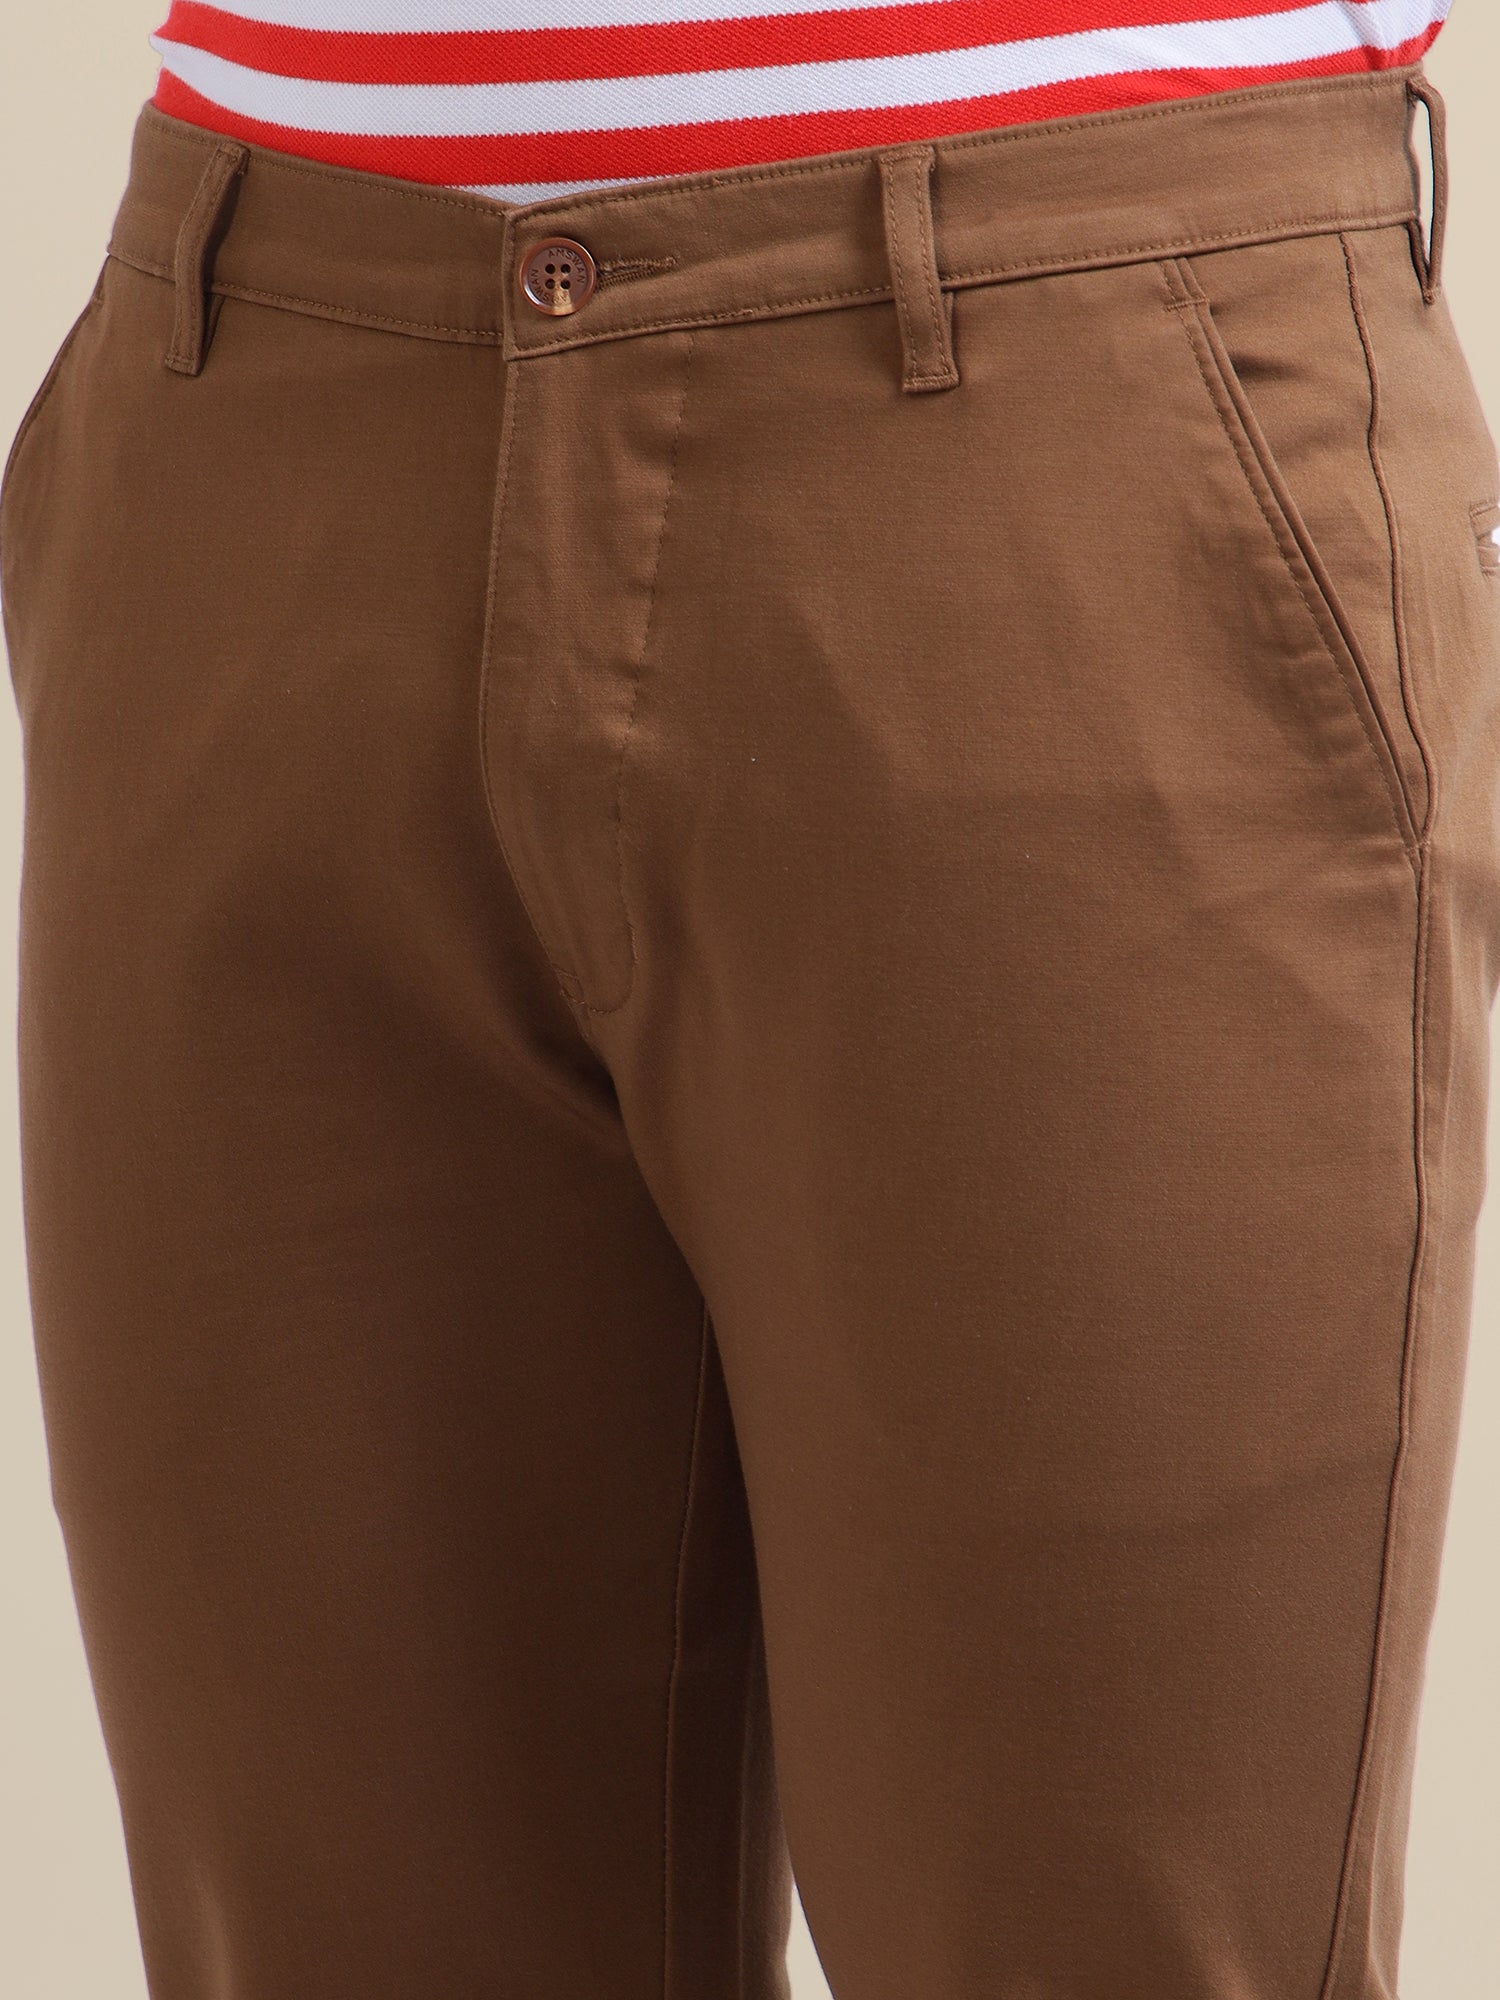 AMSWAN  MEN'S BROWN CASUAL TROUSERS - SOLID COTTON LYCRA, SMART FIT